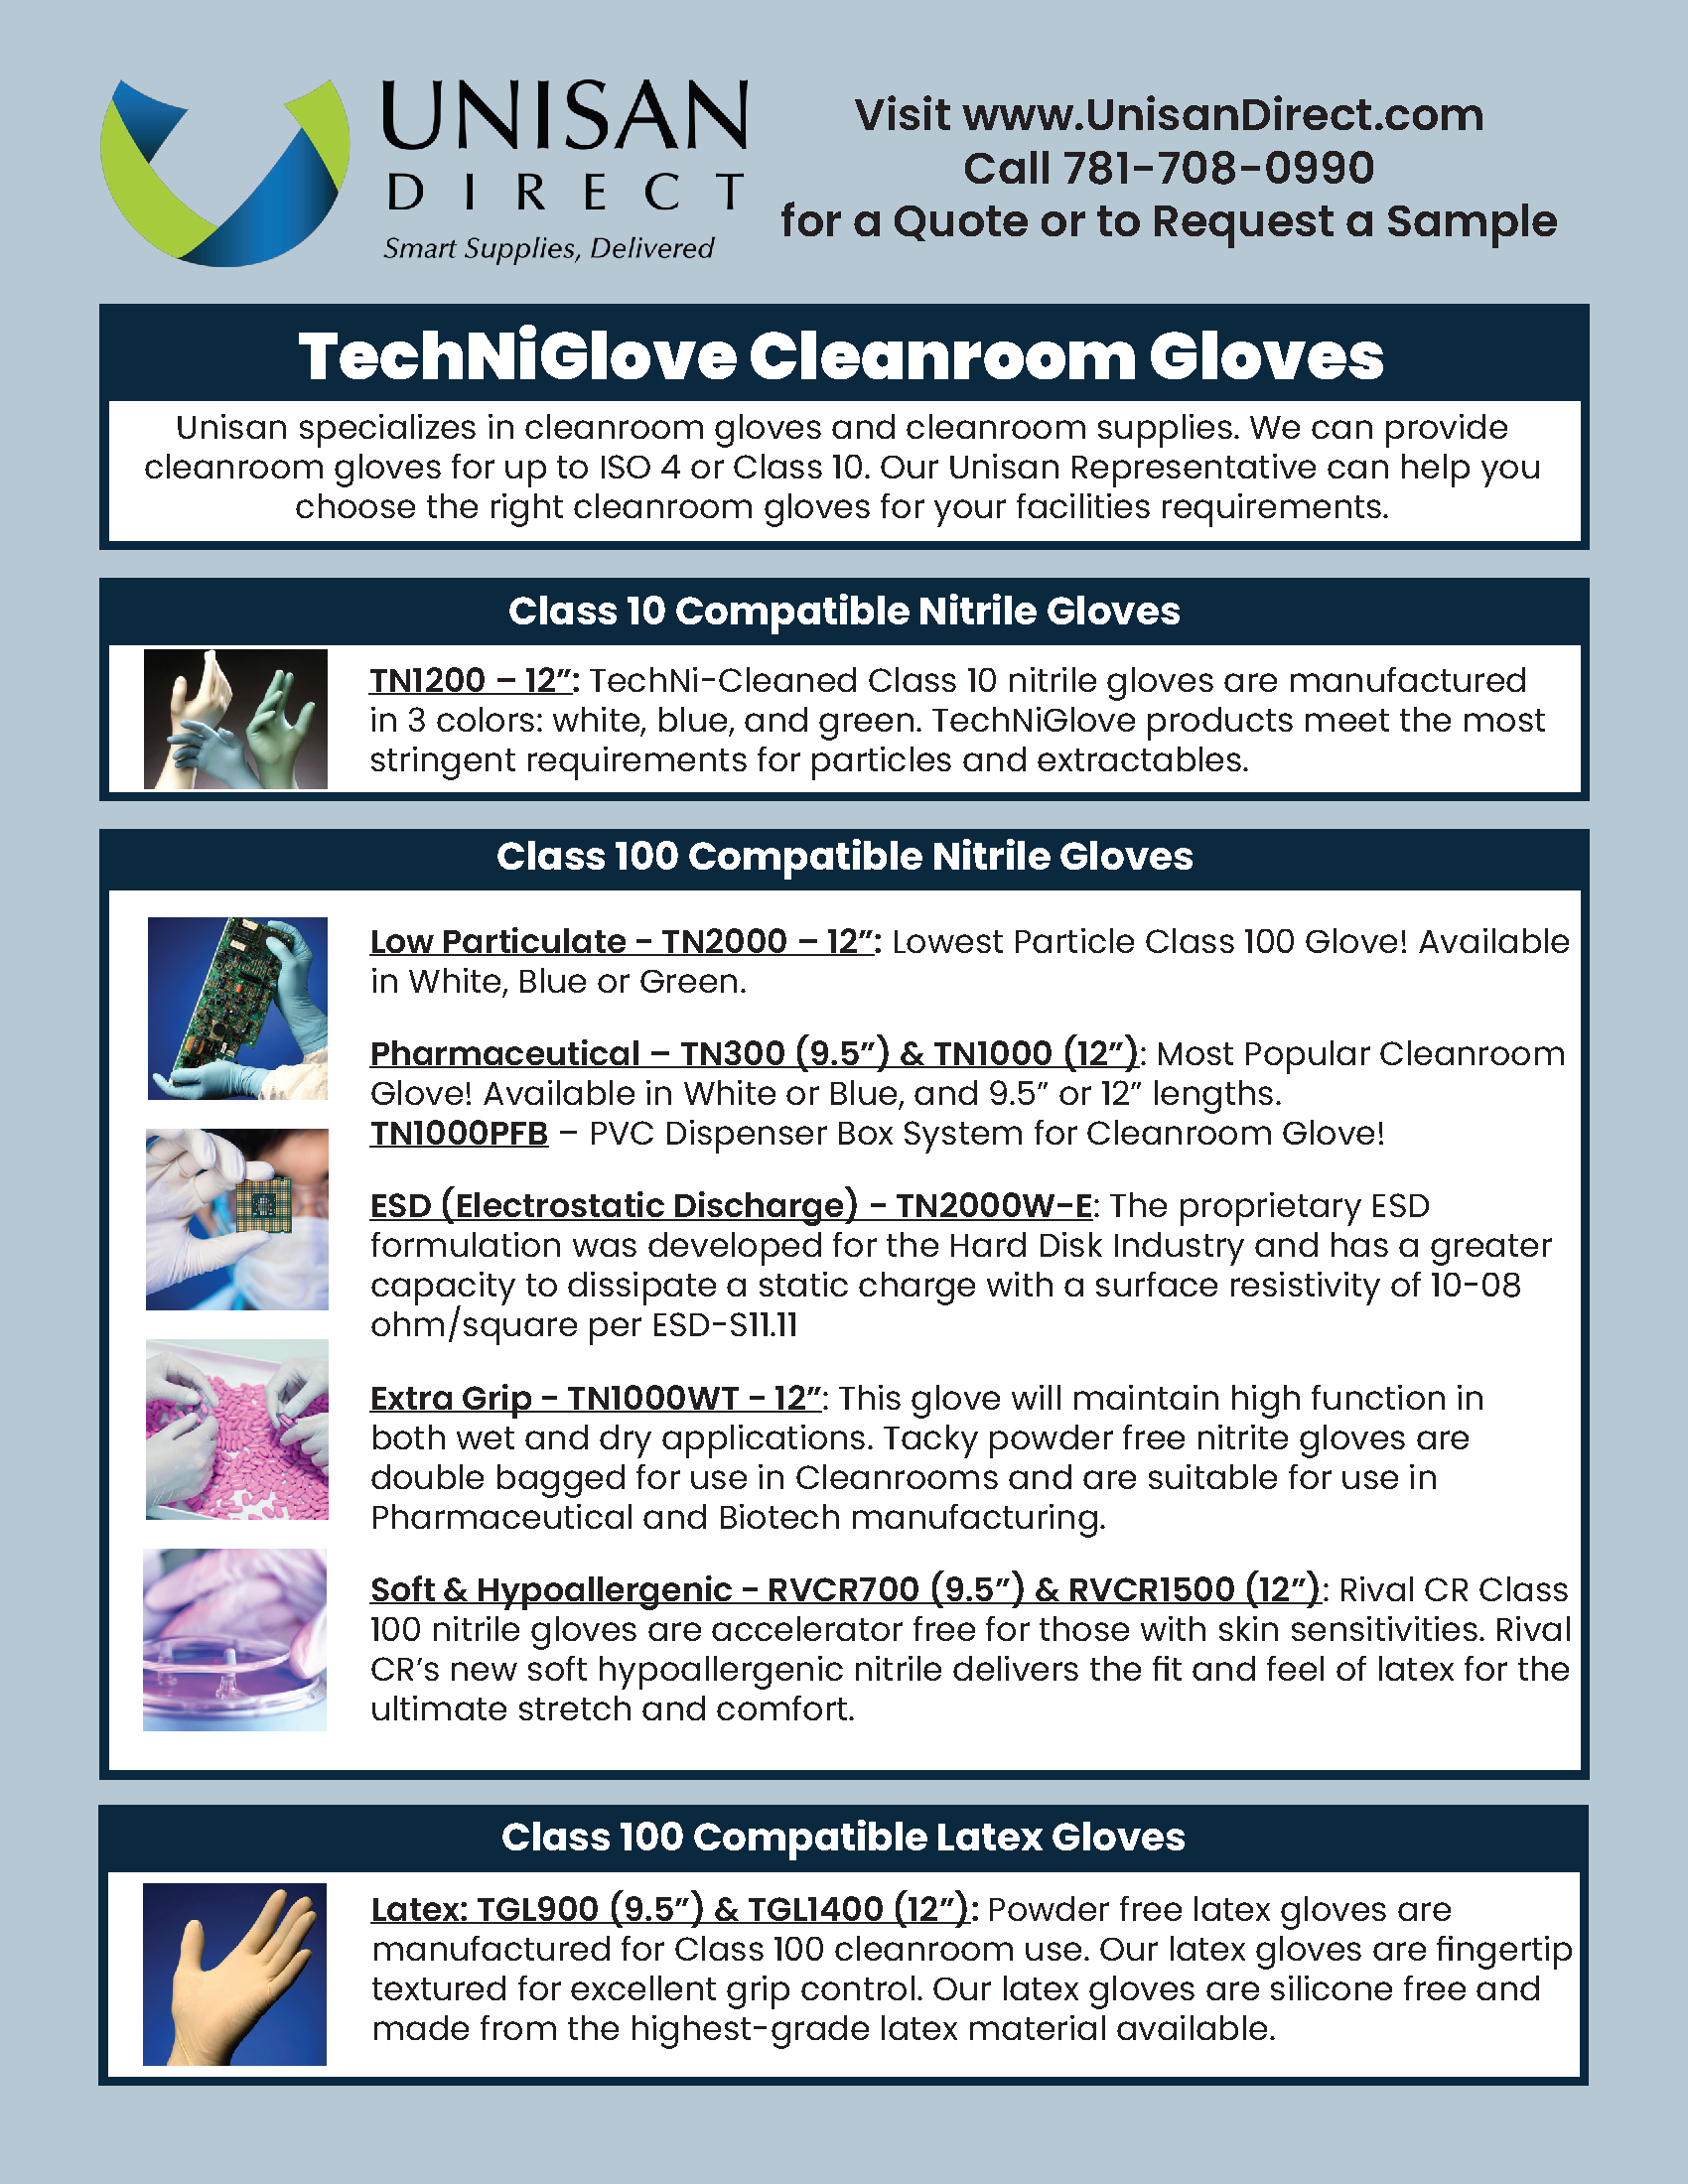 cleanroom-glove-sell-sheet-12.6.22.png